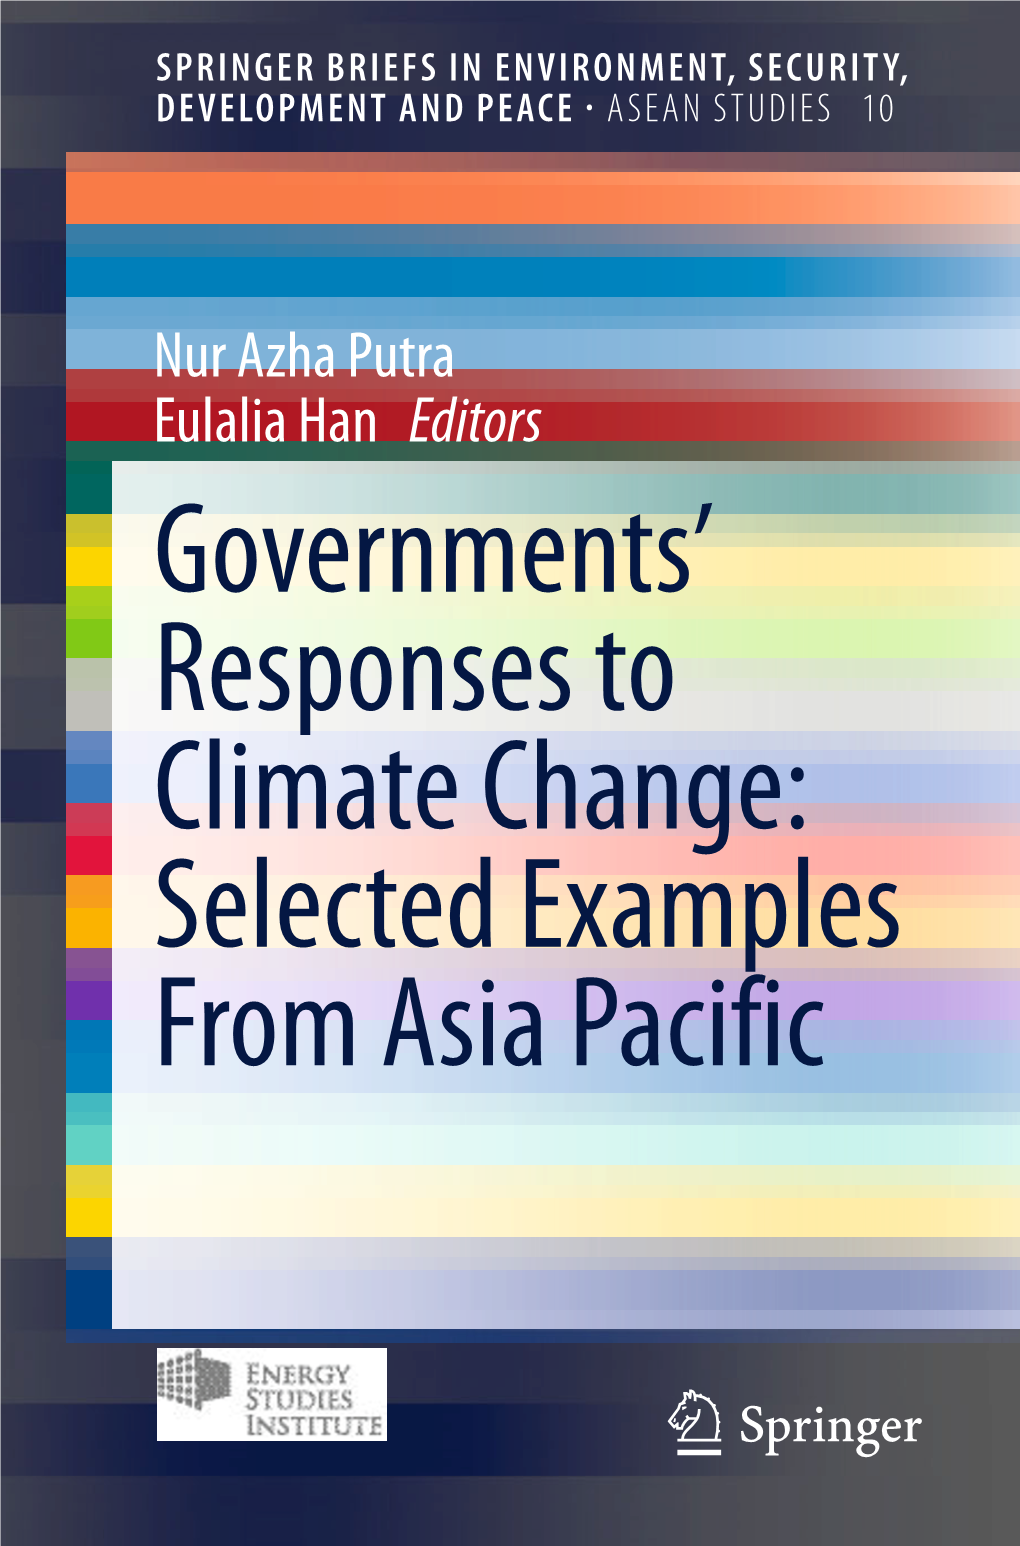 Governments' Responses to Climate Change